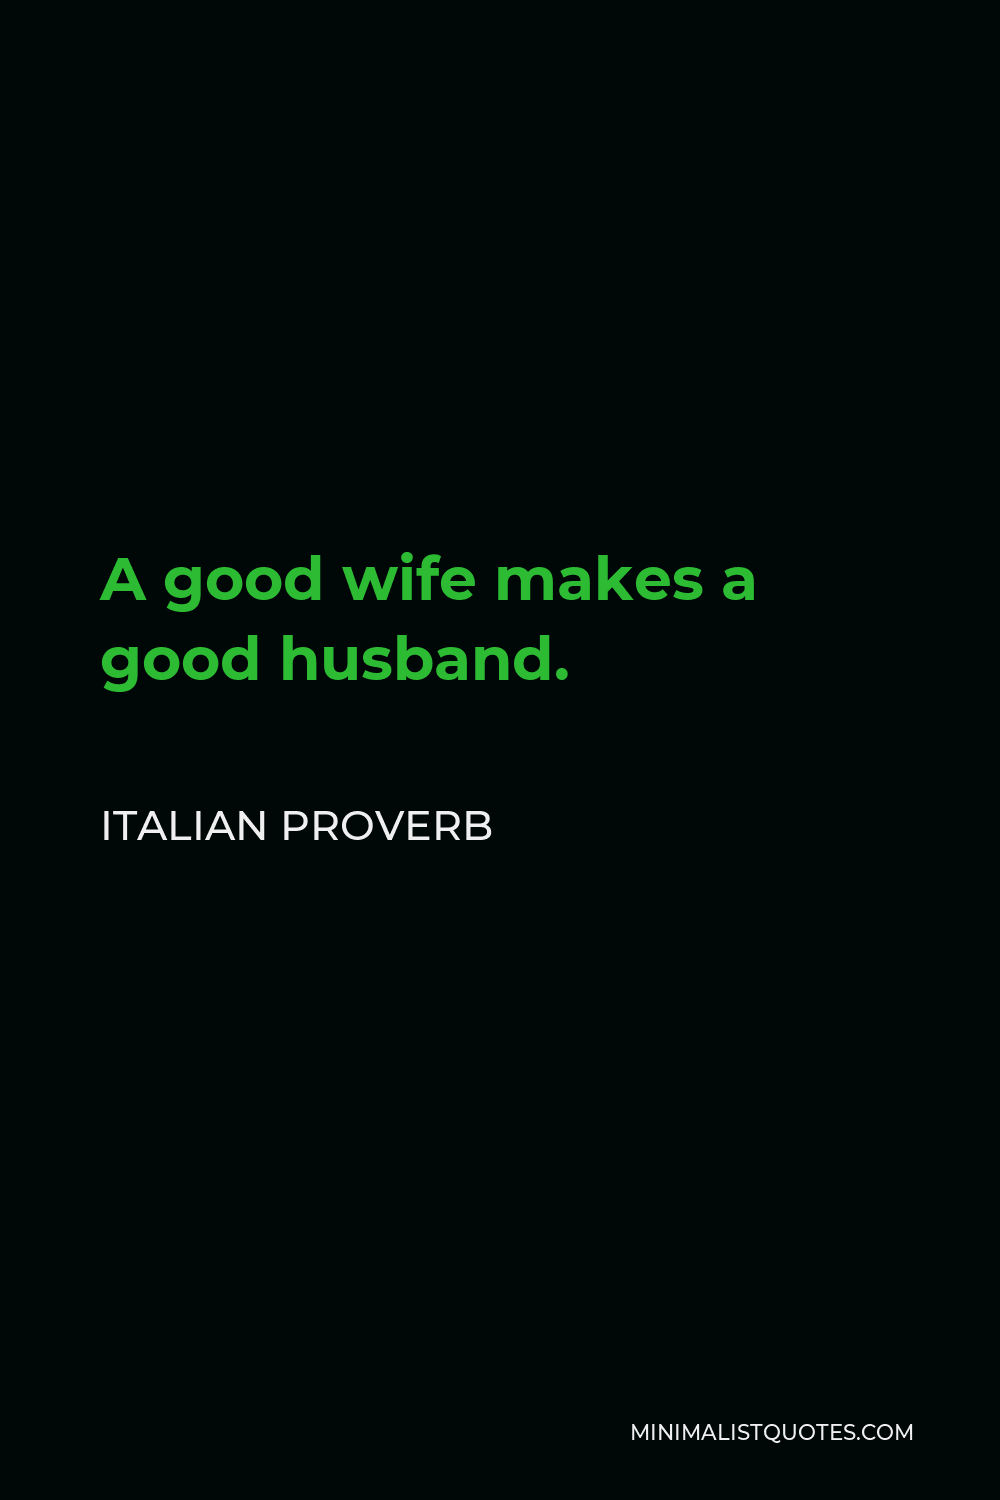 Italian Proverb Quote - A good wife makes a good husband.